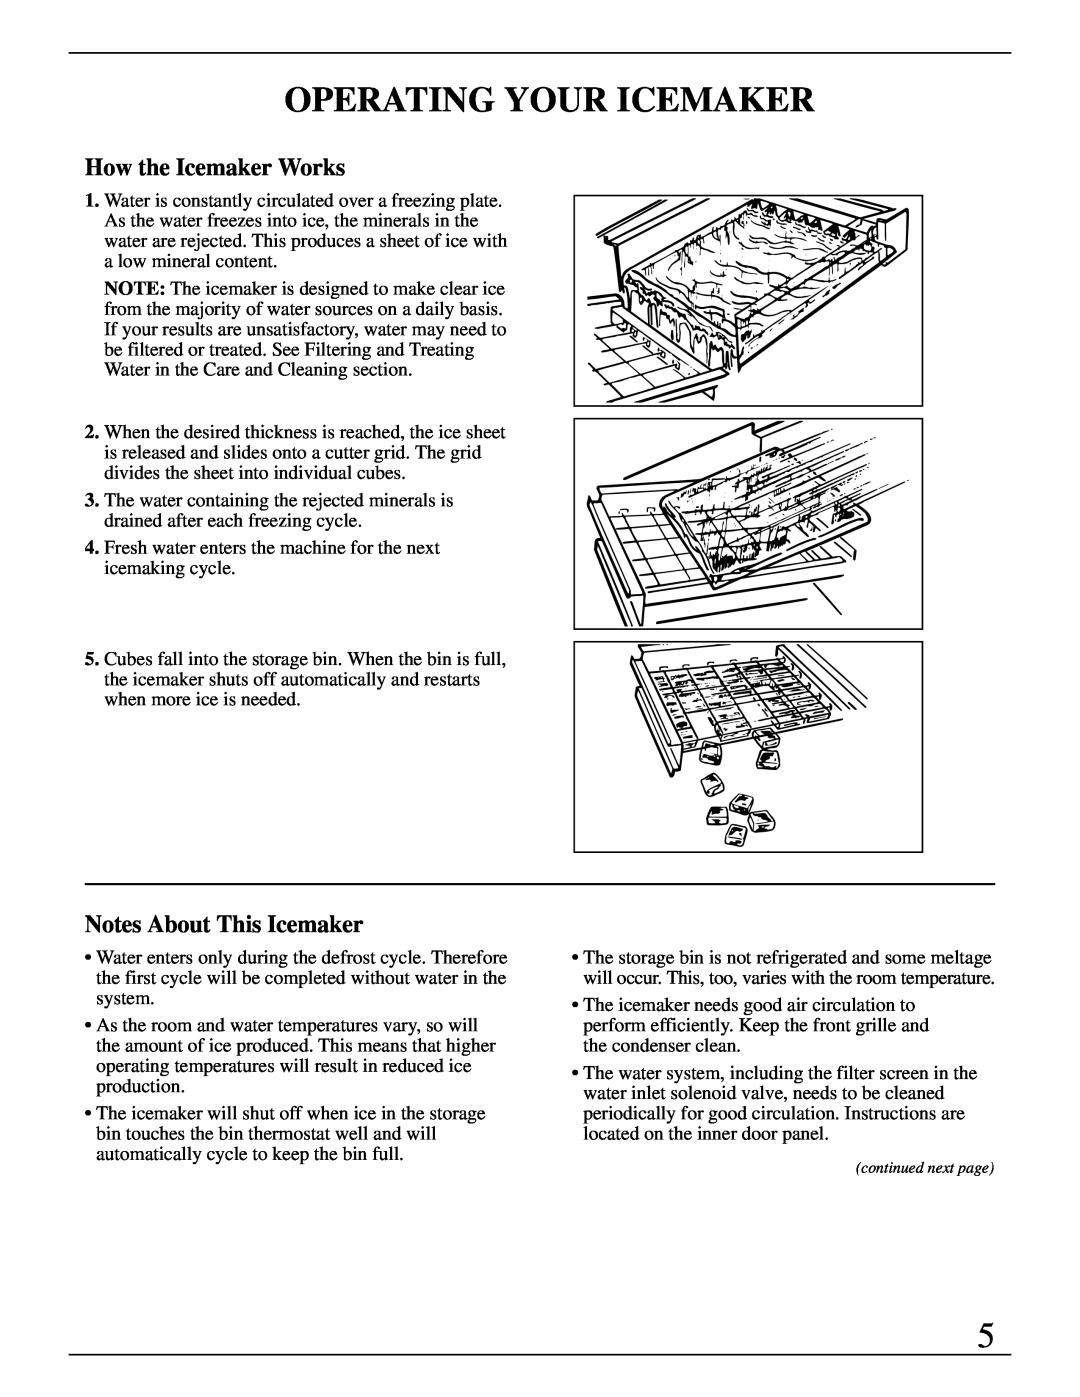 GE Monogram ZDIW50 installation instructions Operating Your Icemaker, How the Icemaker Works, Notes About This Icemaker 